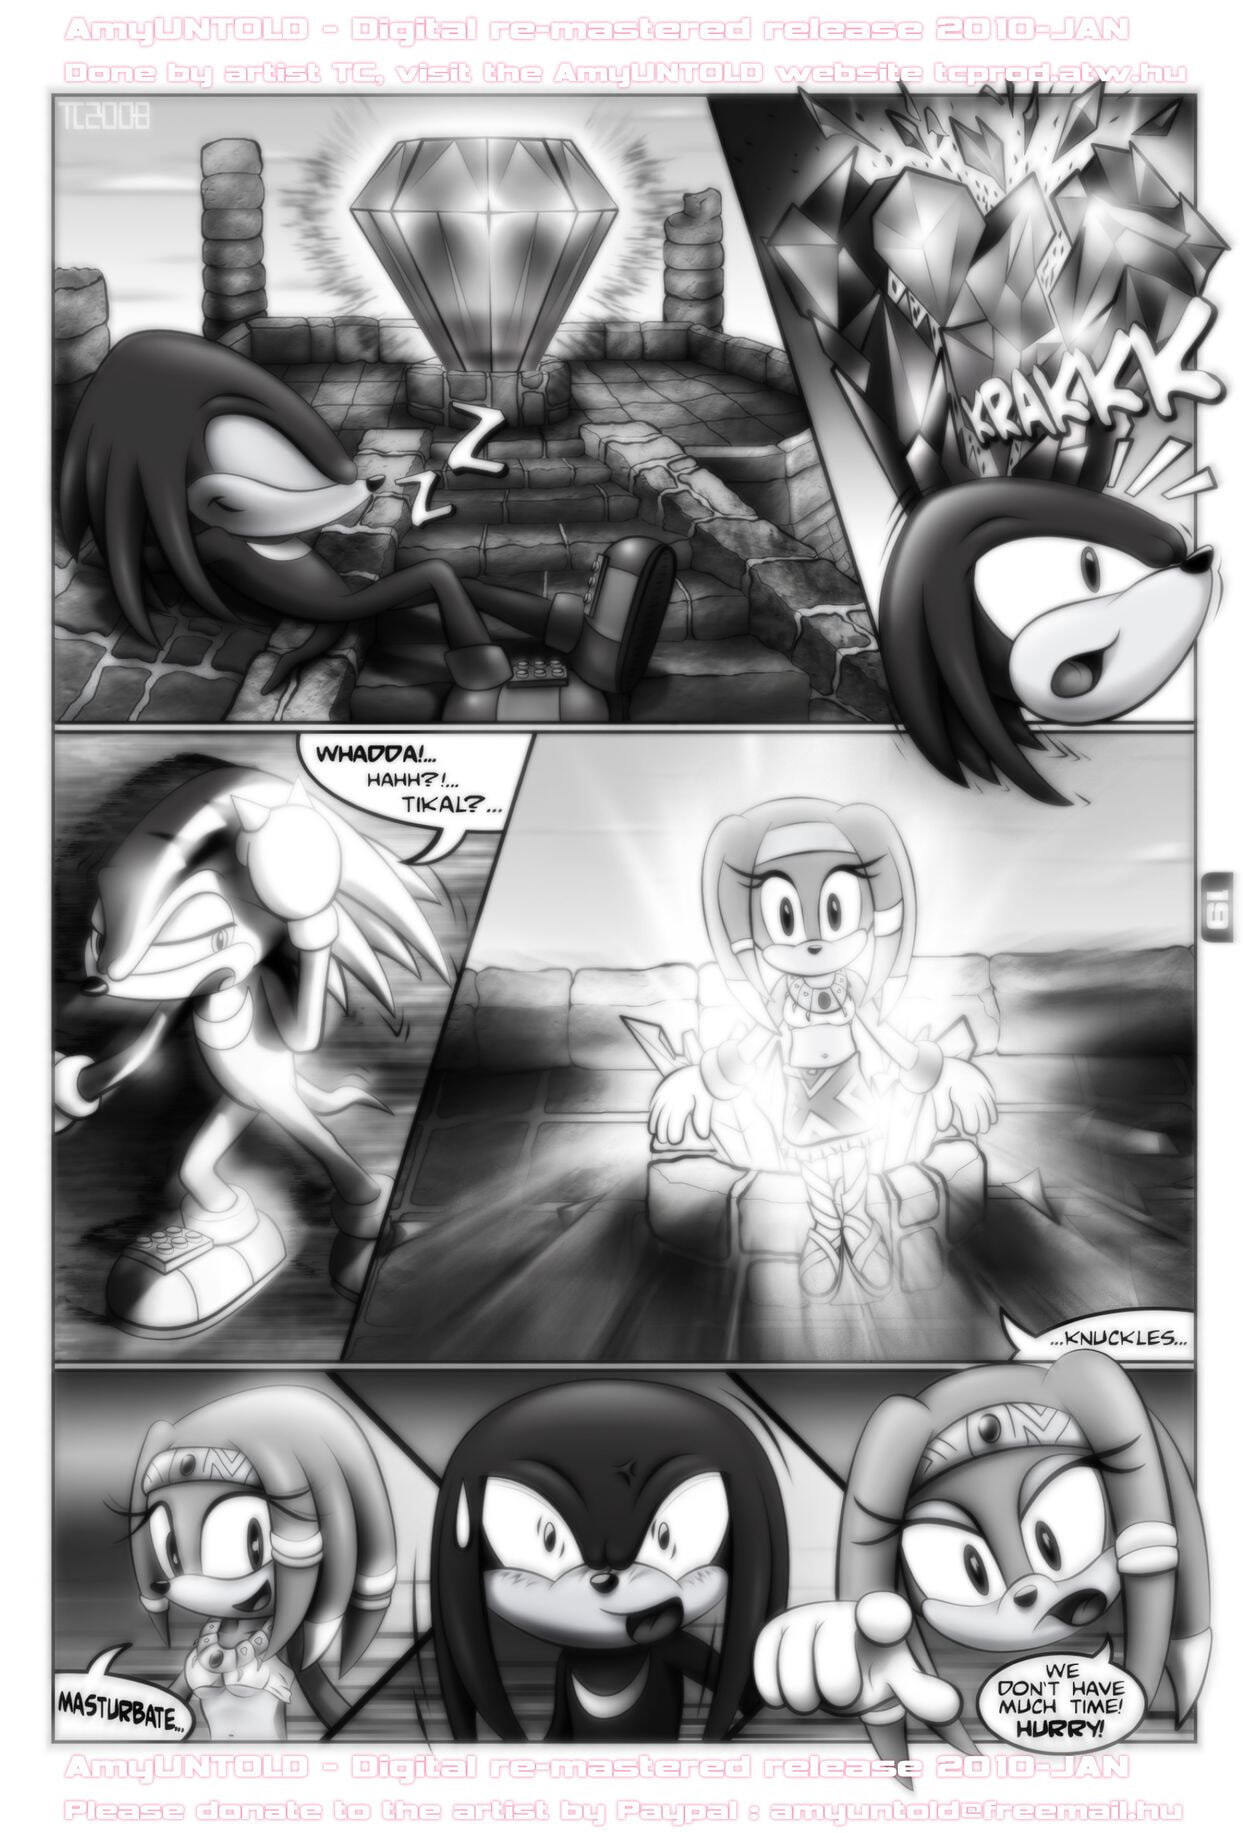 Amy Untold - Finally - Page 19